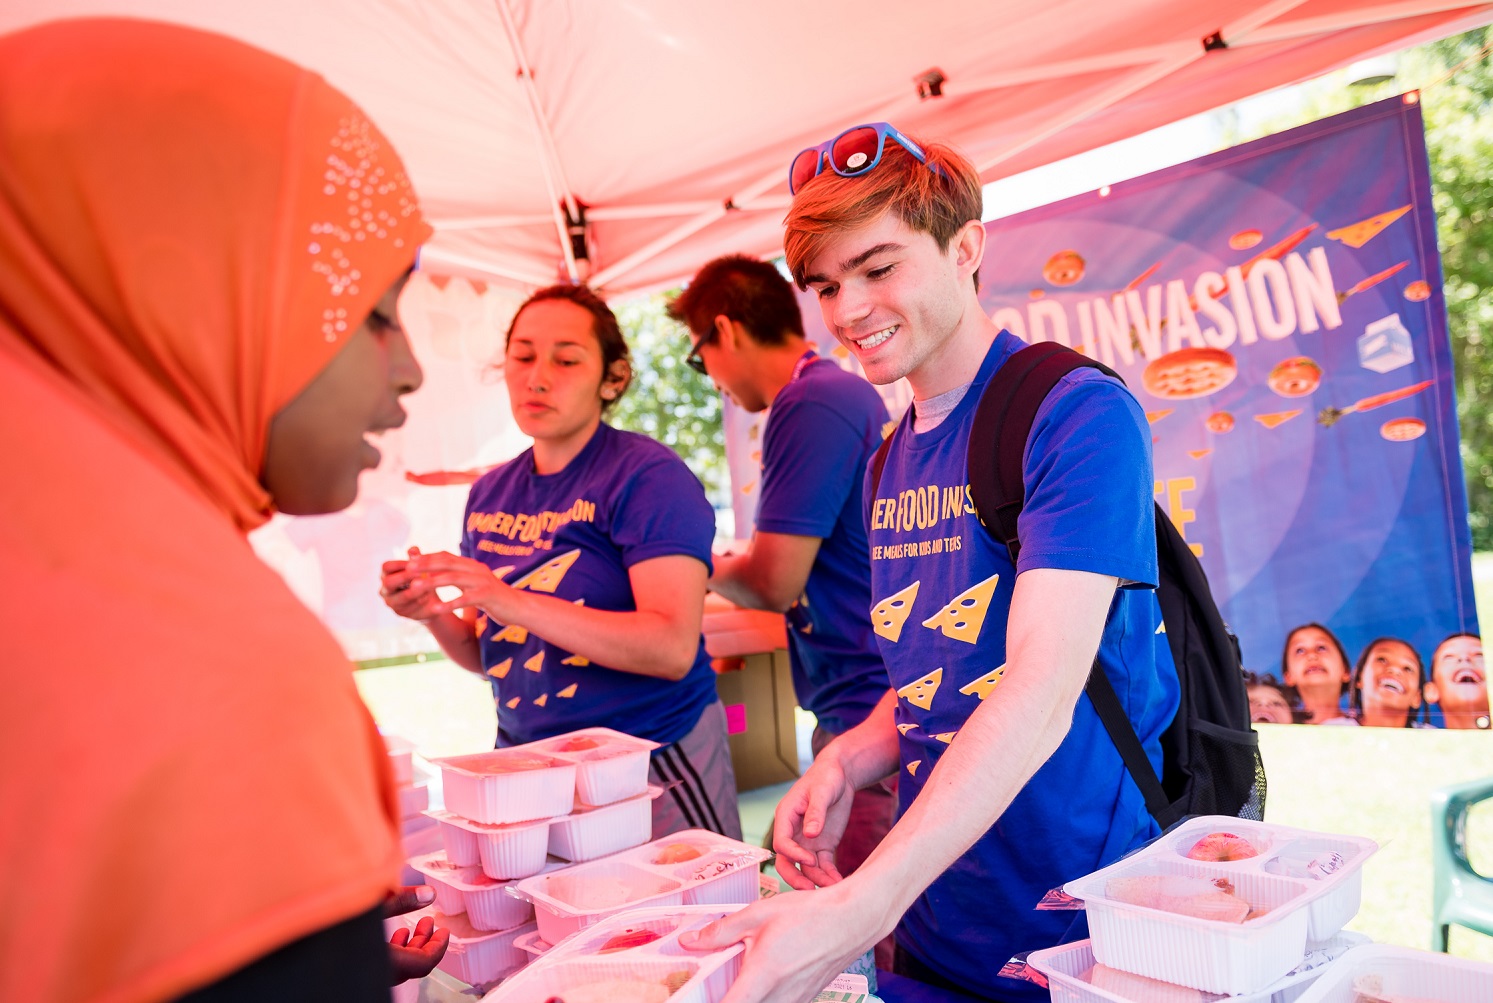 A young teen girl with an orange al-amira scarf in front of a group of smiling volunteers. One is a blond young man, handing her a plastic tray of food